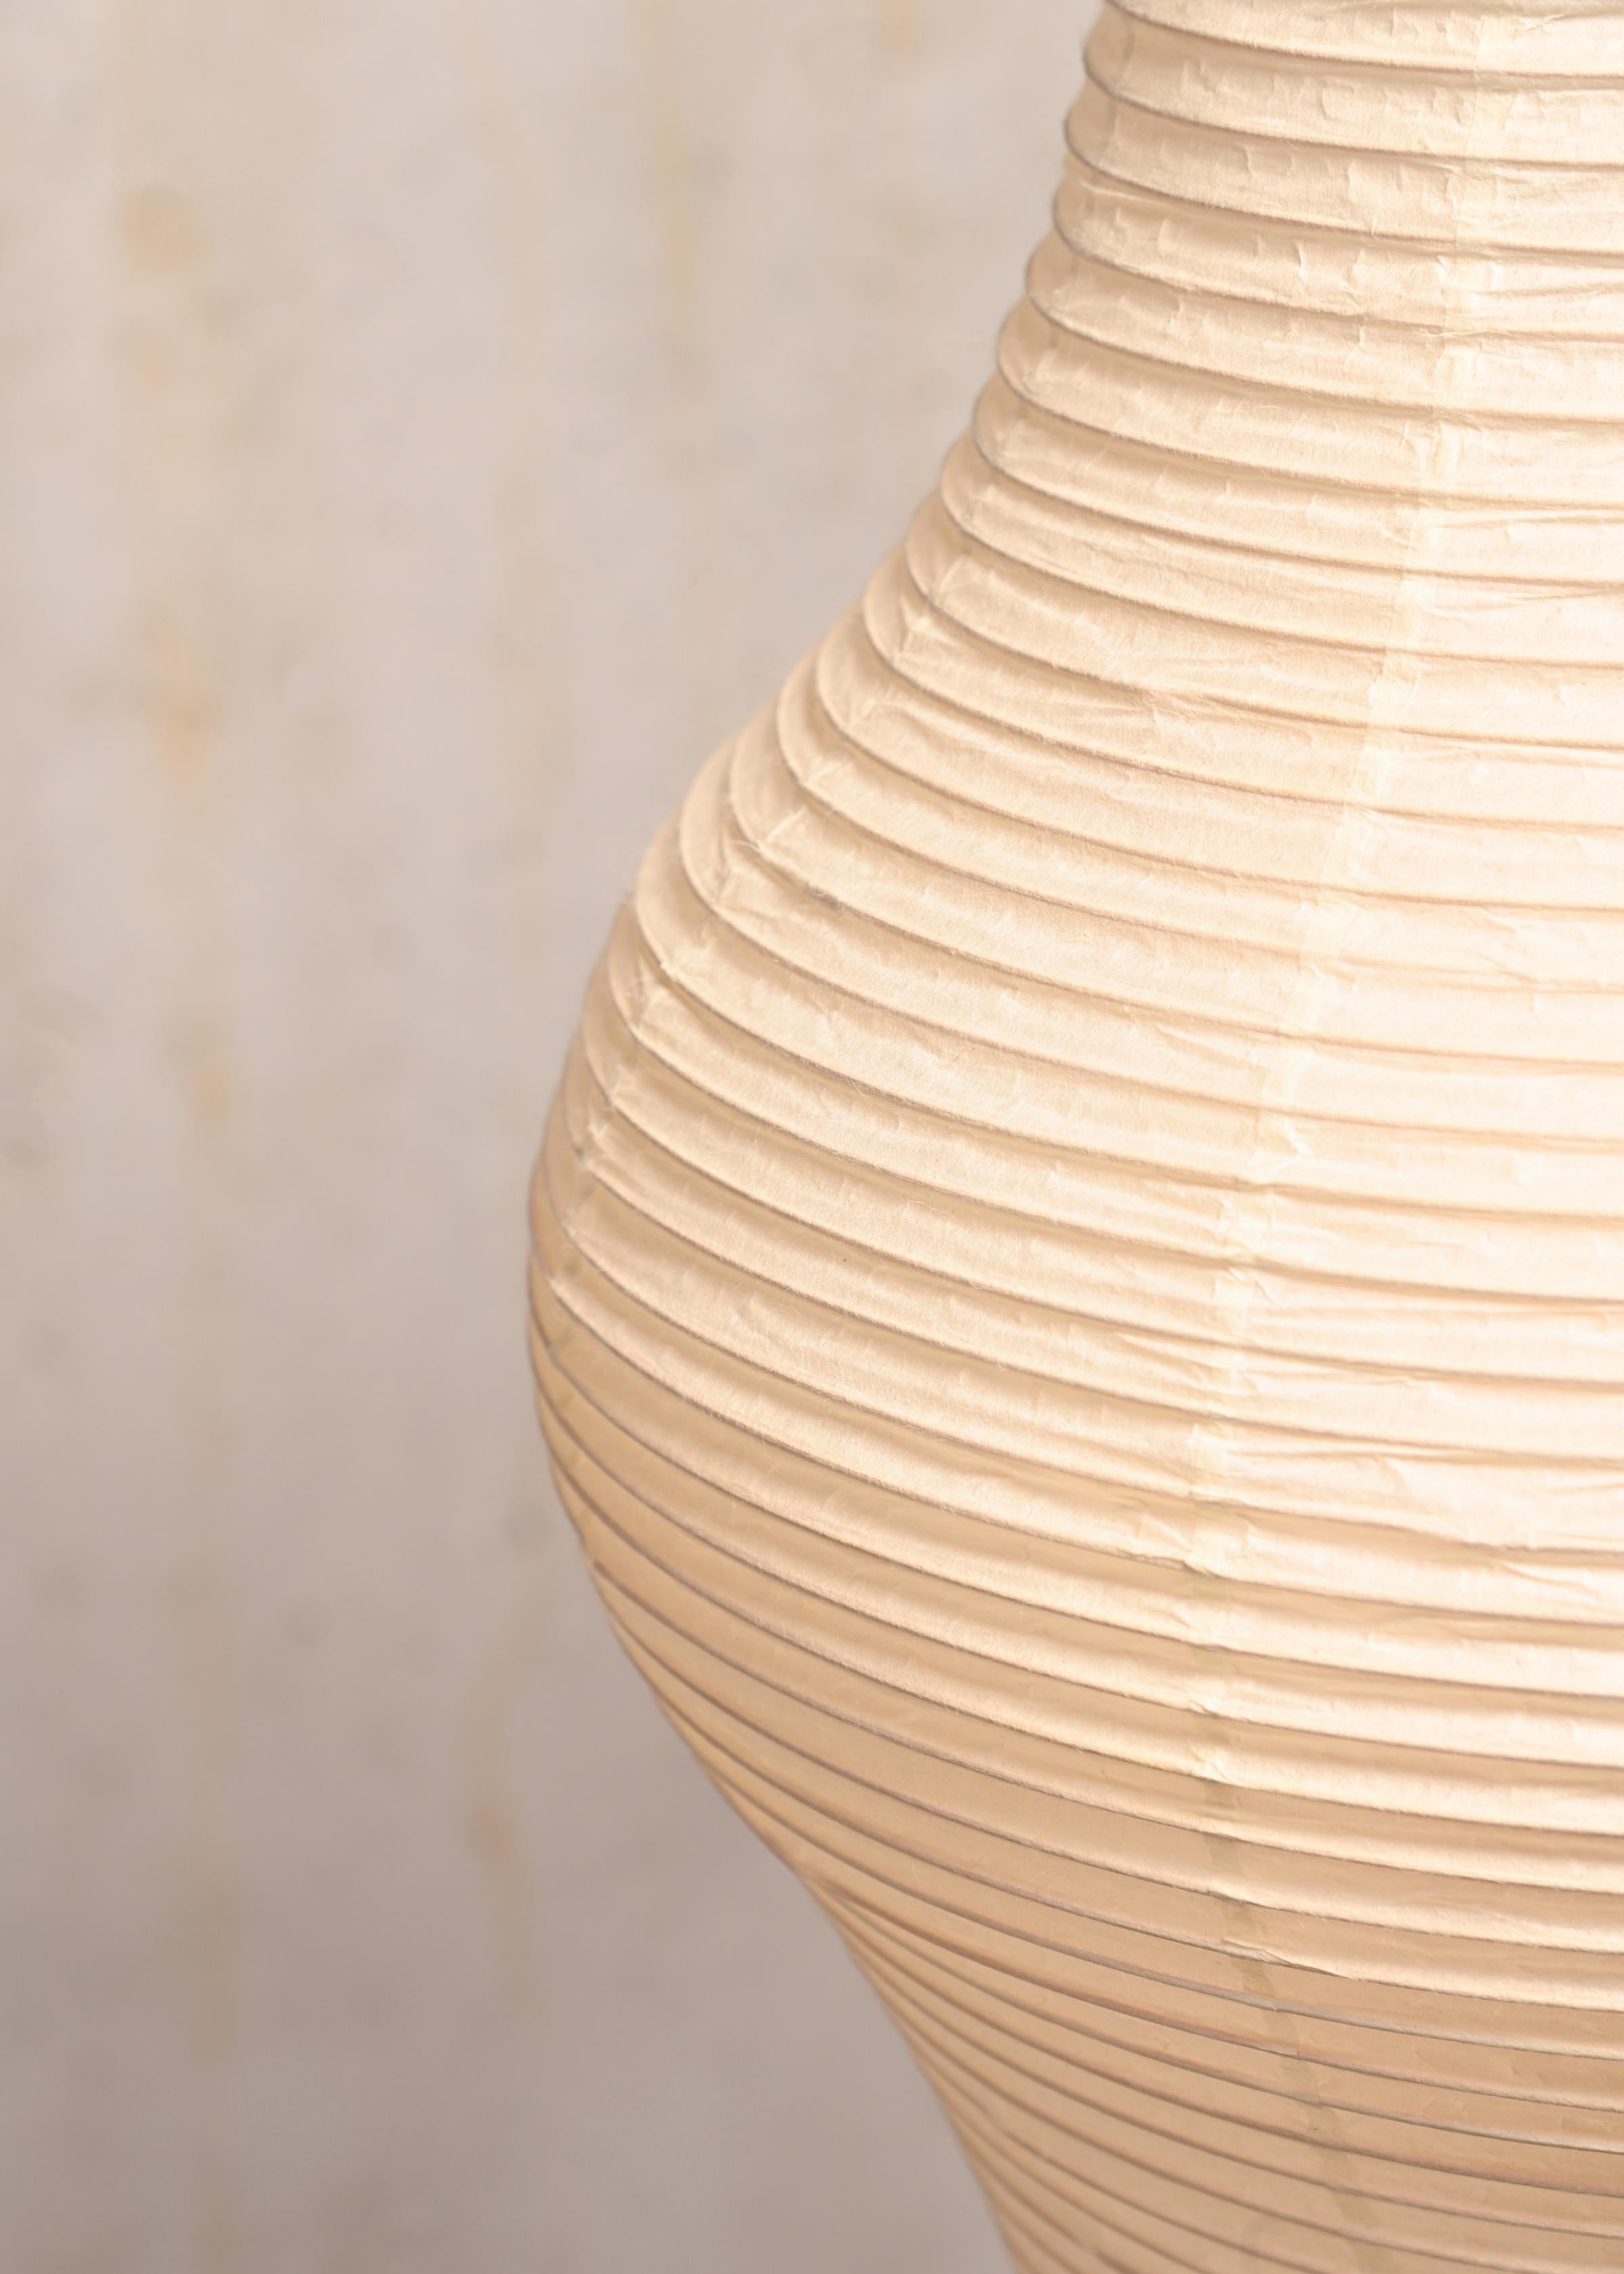 Isamu Noguchi Akari Model 14A Light Sculpture in Washi Paper and Bamboo by Ozeki For Sale 2